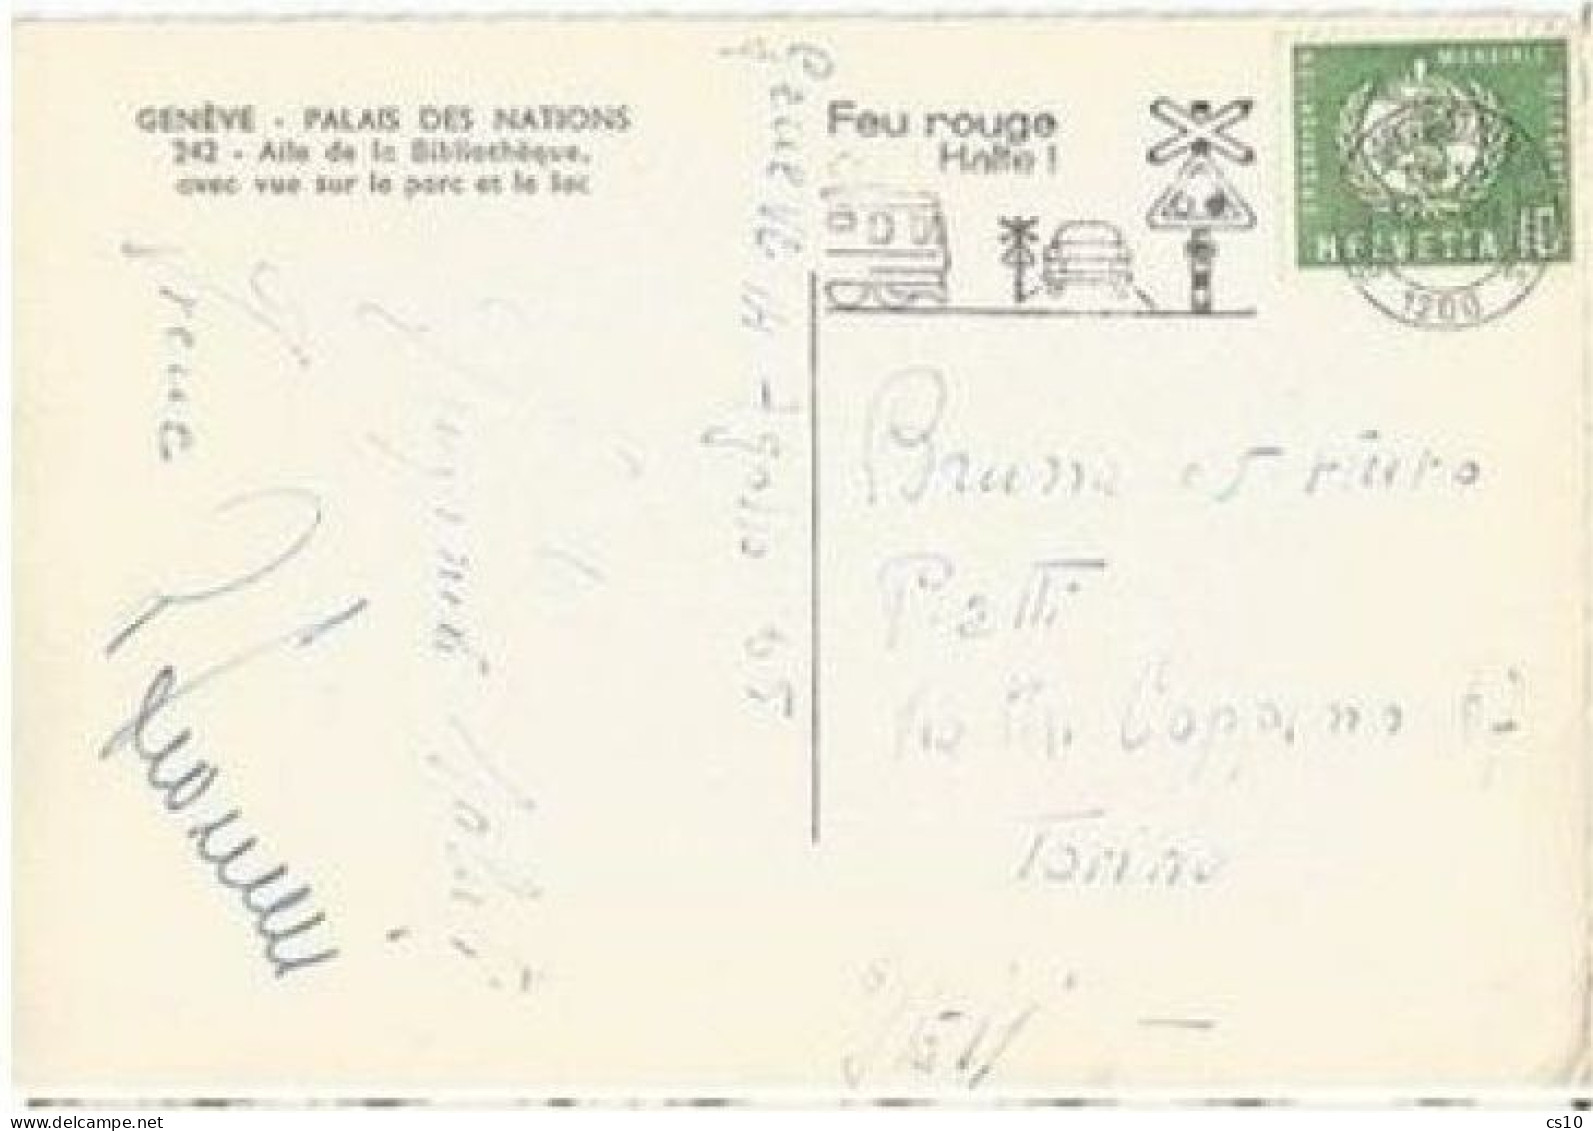 Suisse Service OMS-WHO Nations Unies C.10 Solo Franking Pcard Geneve 13aug1965 Official Cachet X Italy - Covers & Documents